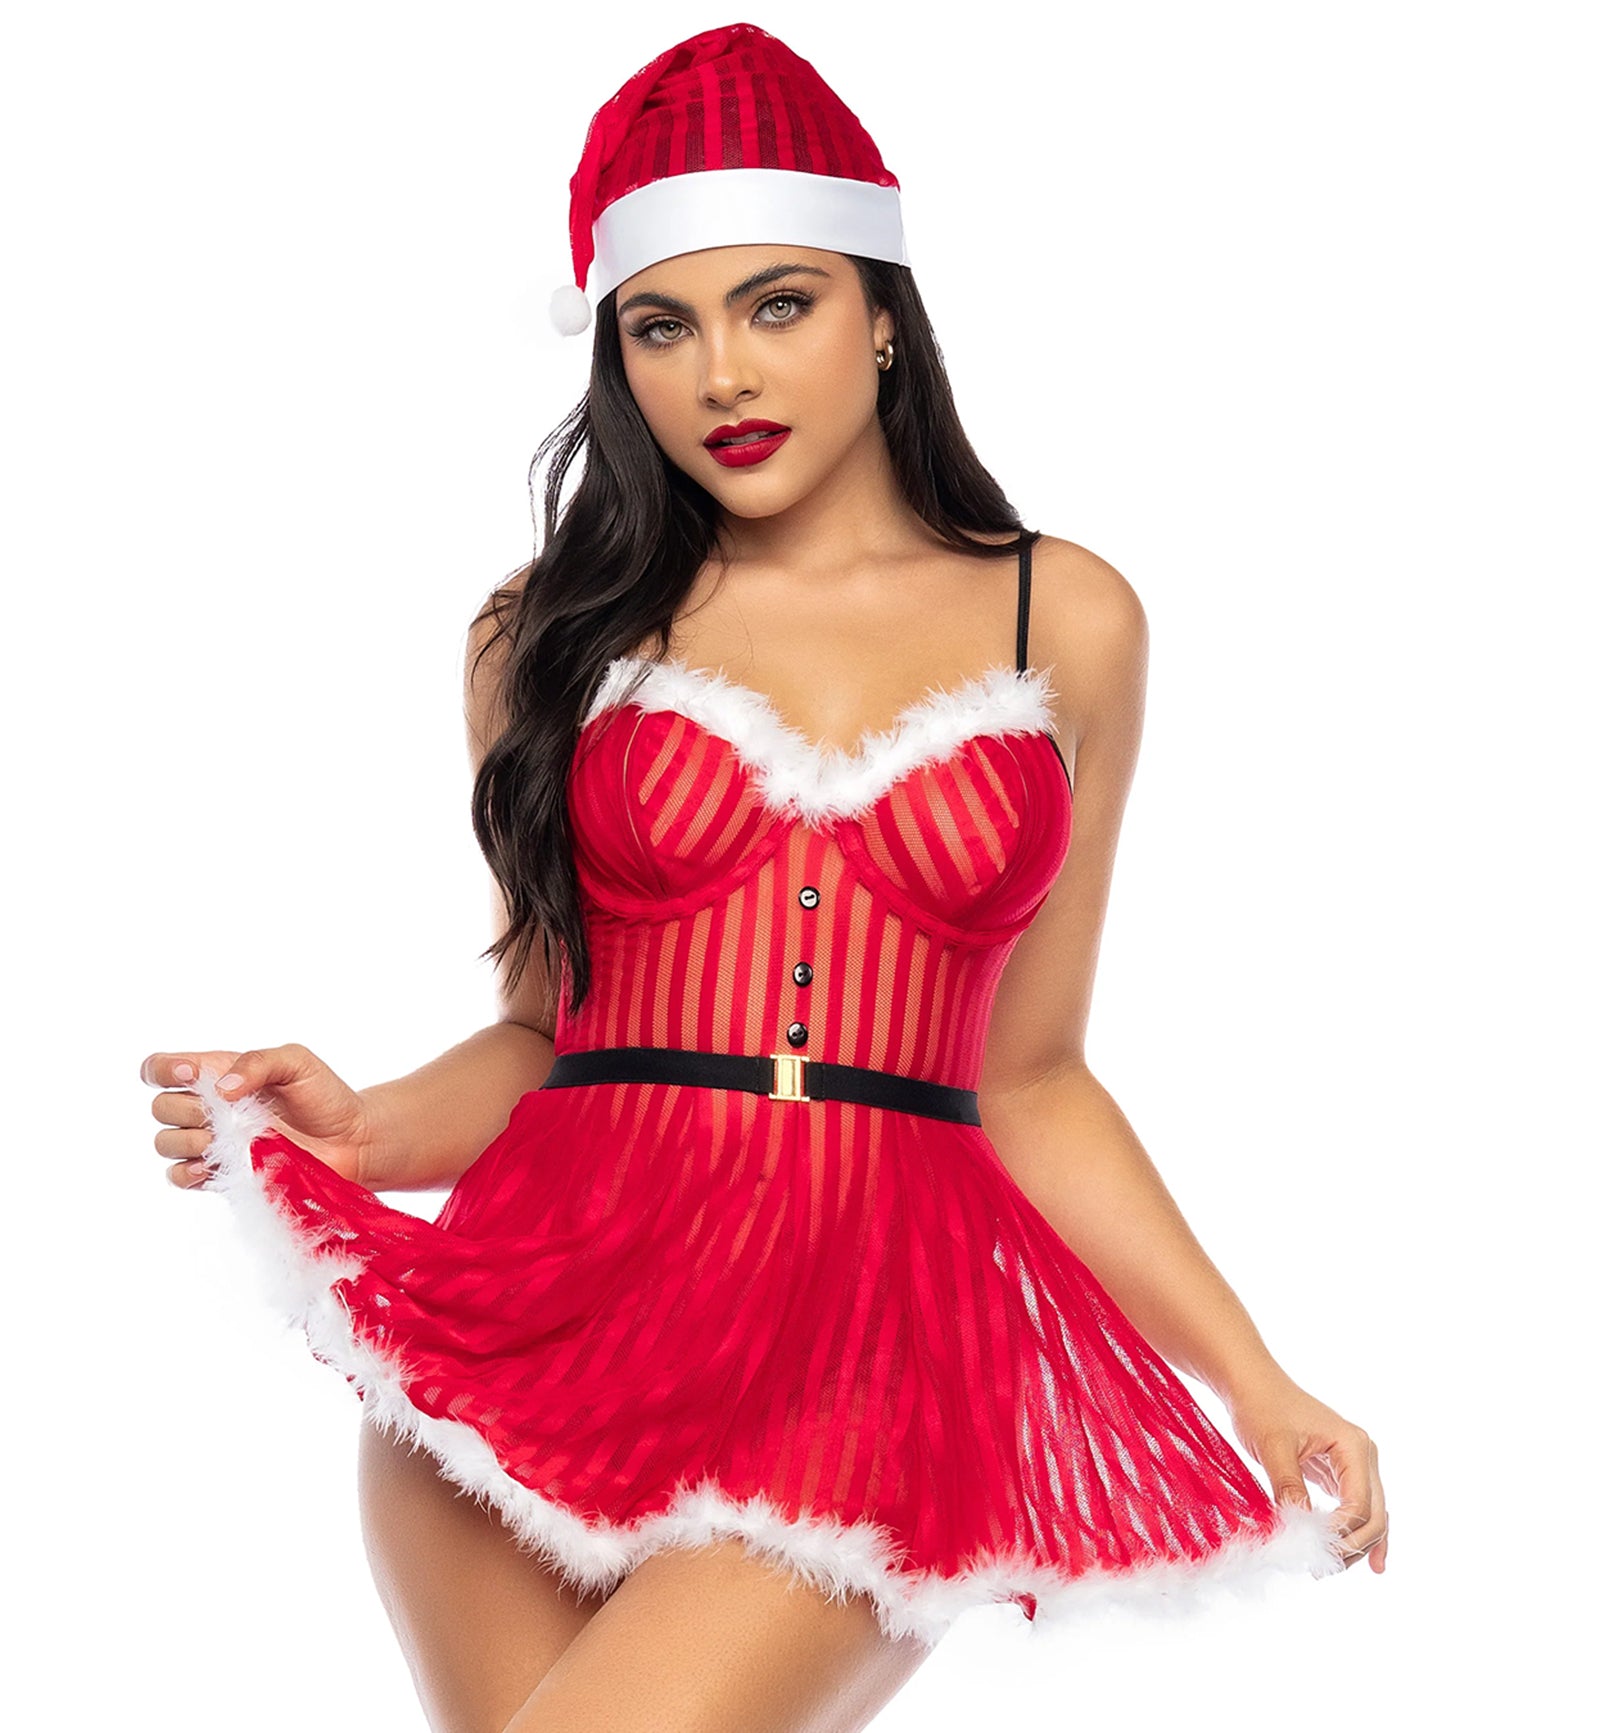 Mapale Mrs. Claus 2 Piece Set: Peek-a-Boo Dress and Hat (60010),Small,Red - Red,Small